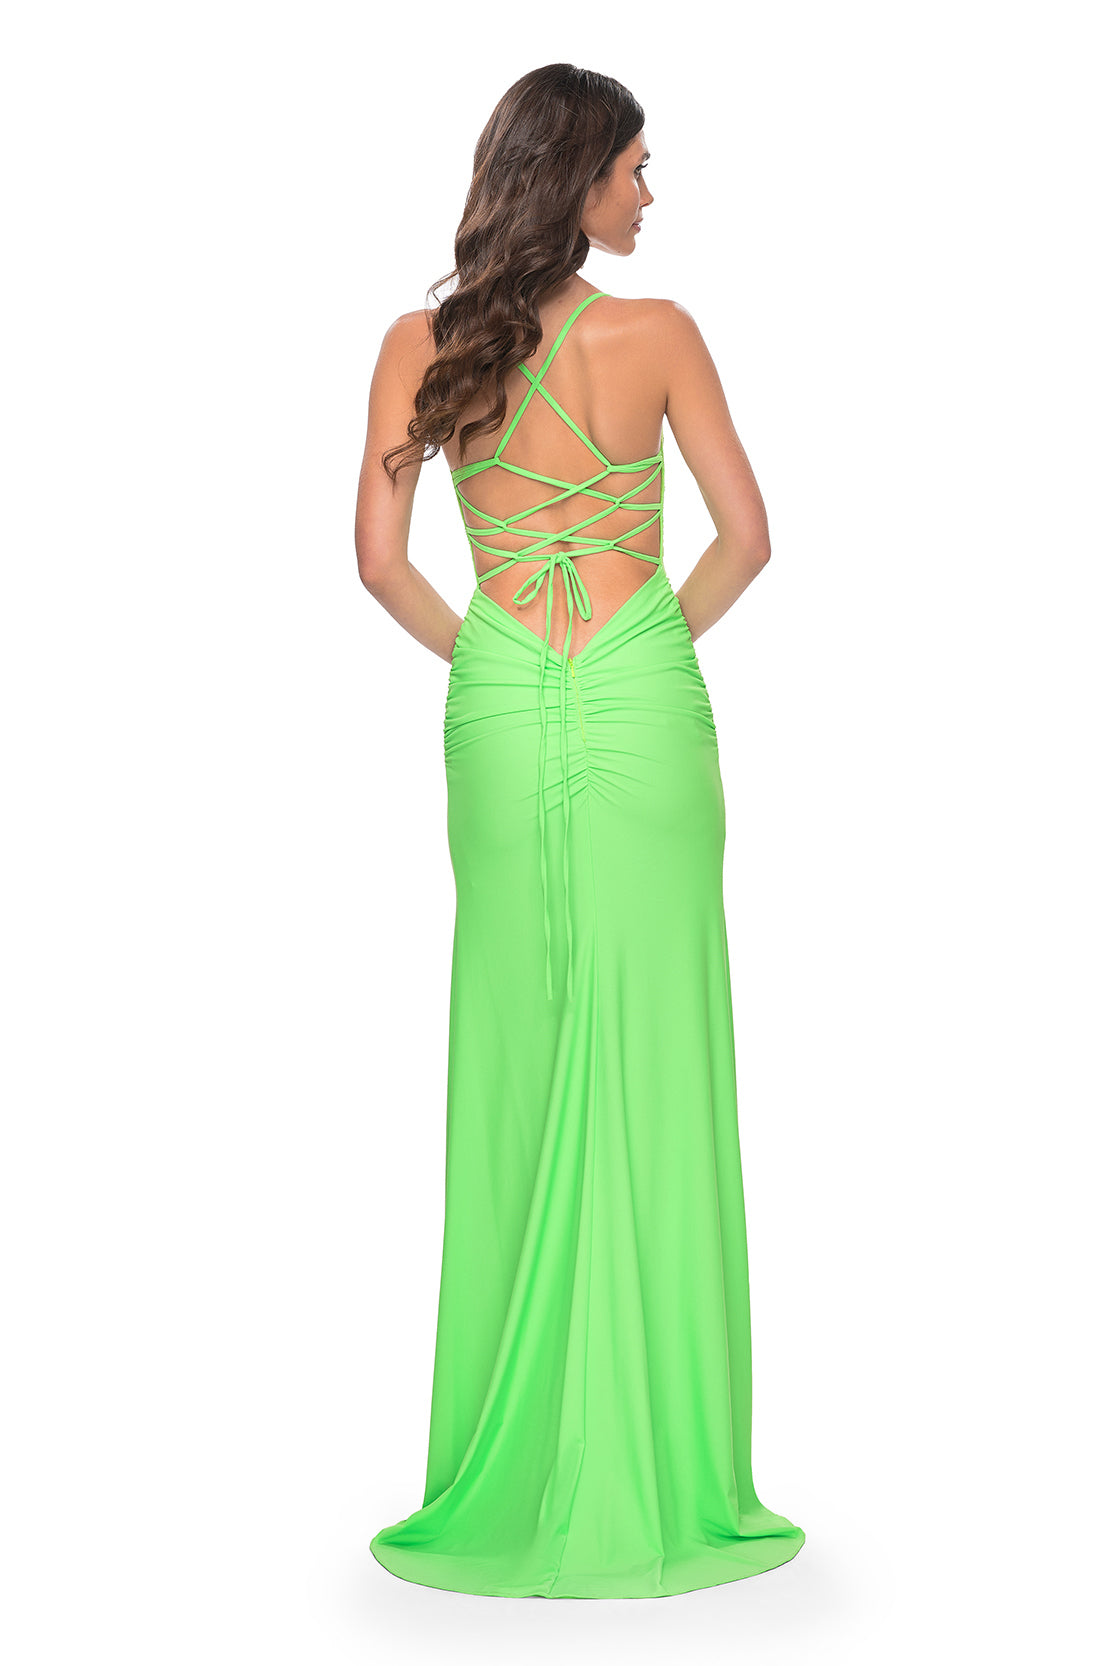 La Femme 31988 Rhinestone Embellished Lace Bodice Prom Gown - A glamorous long dress featuring a ruched jersey skirt, high slit, rhinestone embellished lace bodice with exposed boning, lace-up back, and ruching along the zipper for a perfect fit. The model is wearing the dress in bright green.